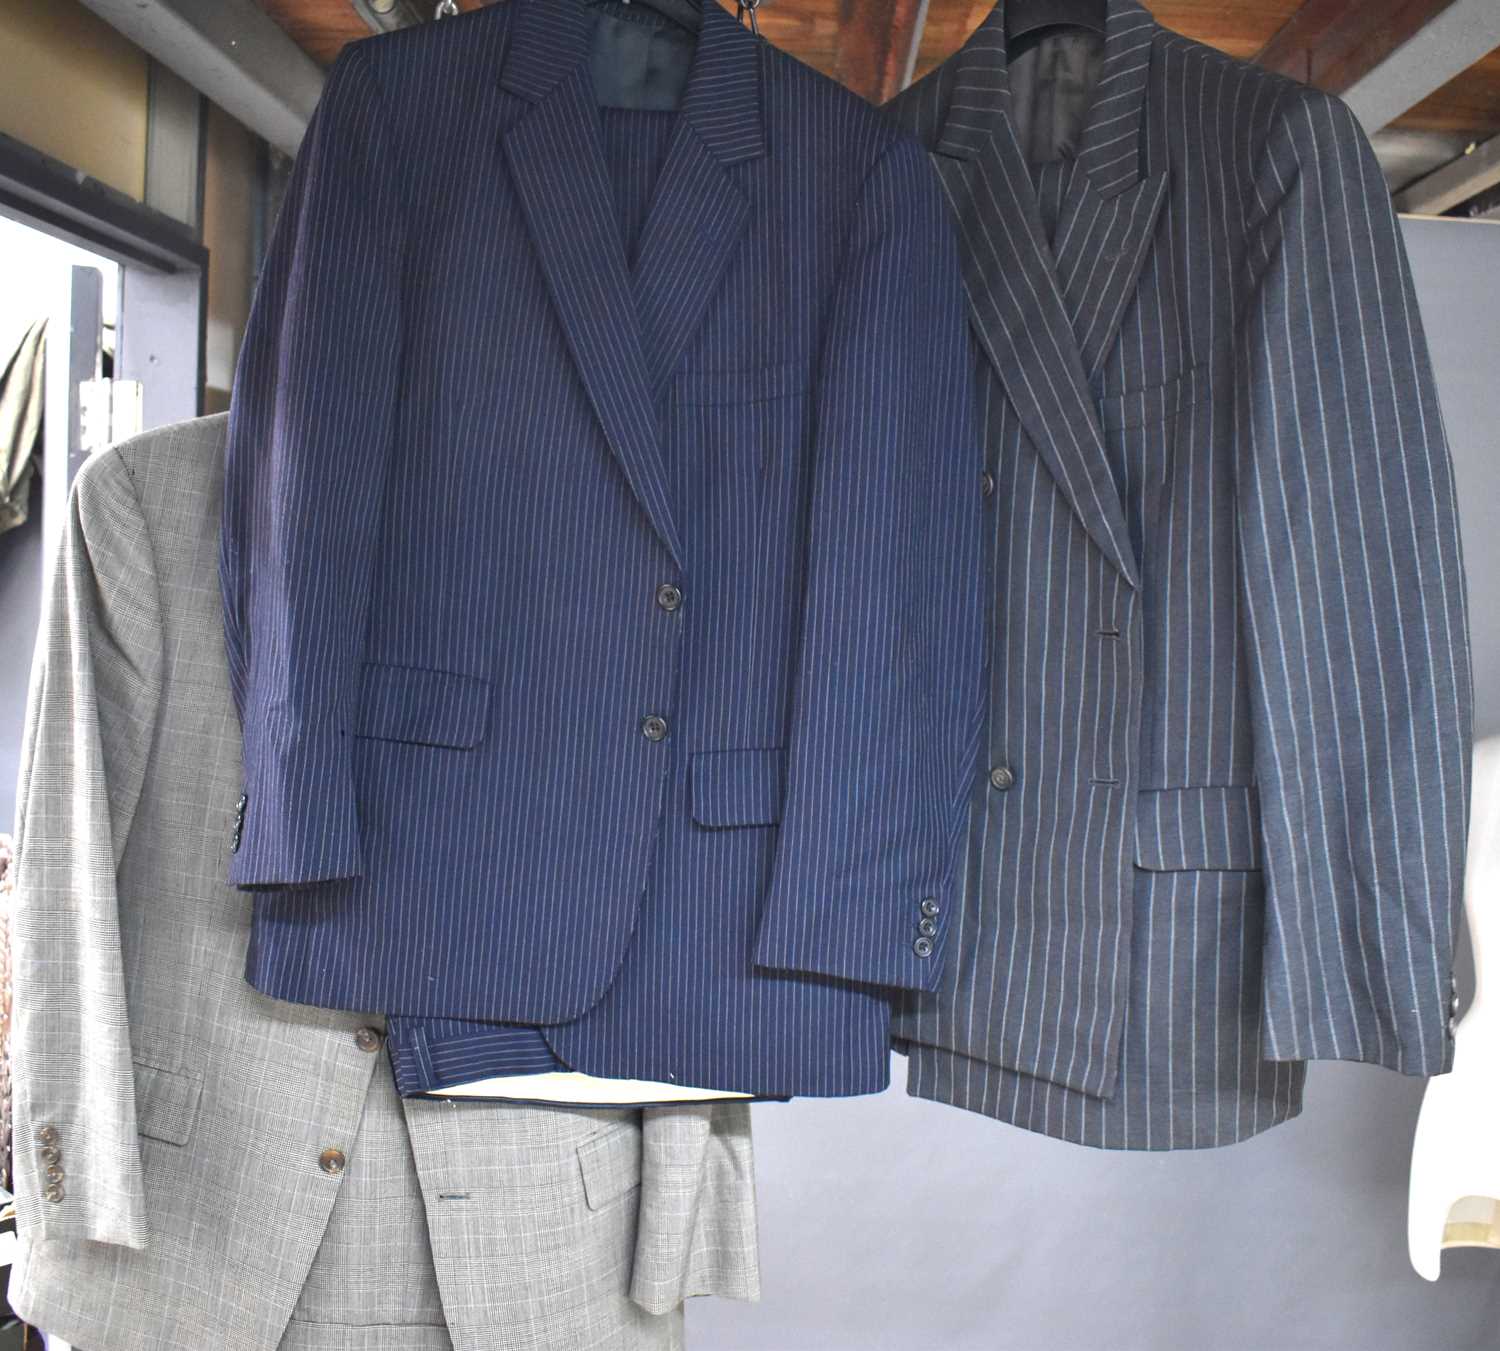 Two vintage Aquascutum pinstripe suits together with a Ralph Lauren suit.